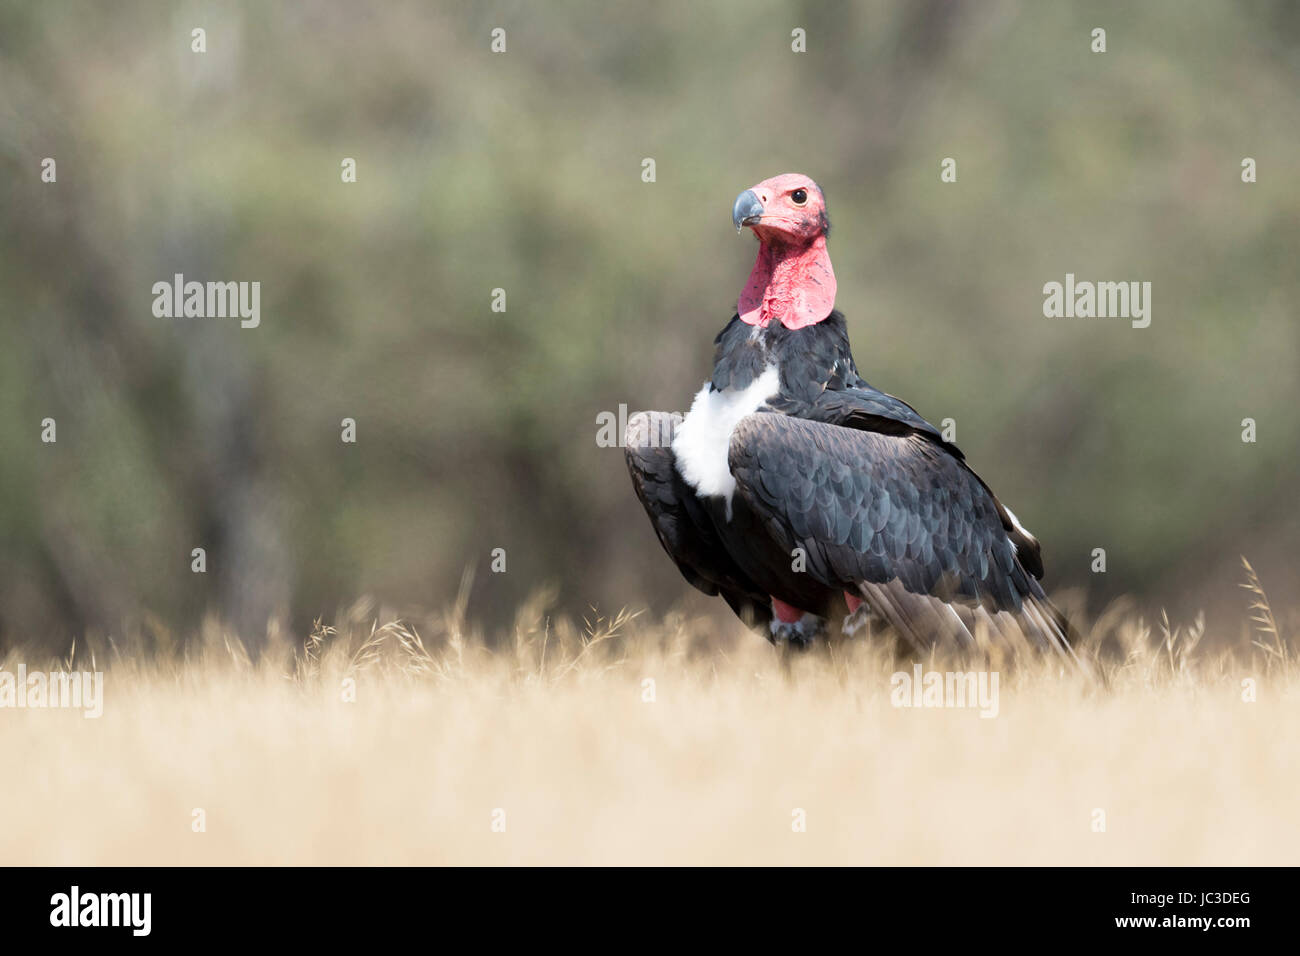 Red-headed vulture (Asian king vulture) (Indian black vulture) (Pondicherry vulture) on the ground, Ranthambhore national park, Rajasthan, India, Stock Photo